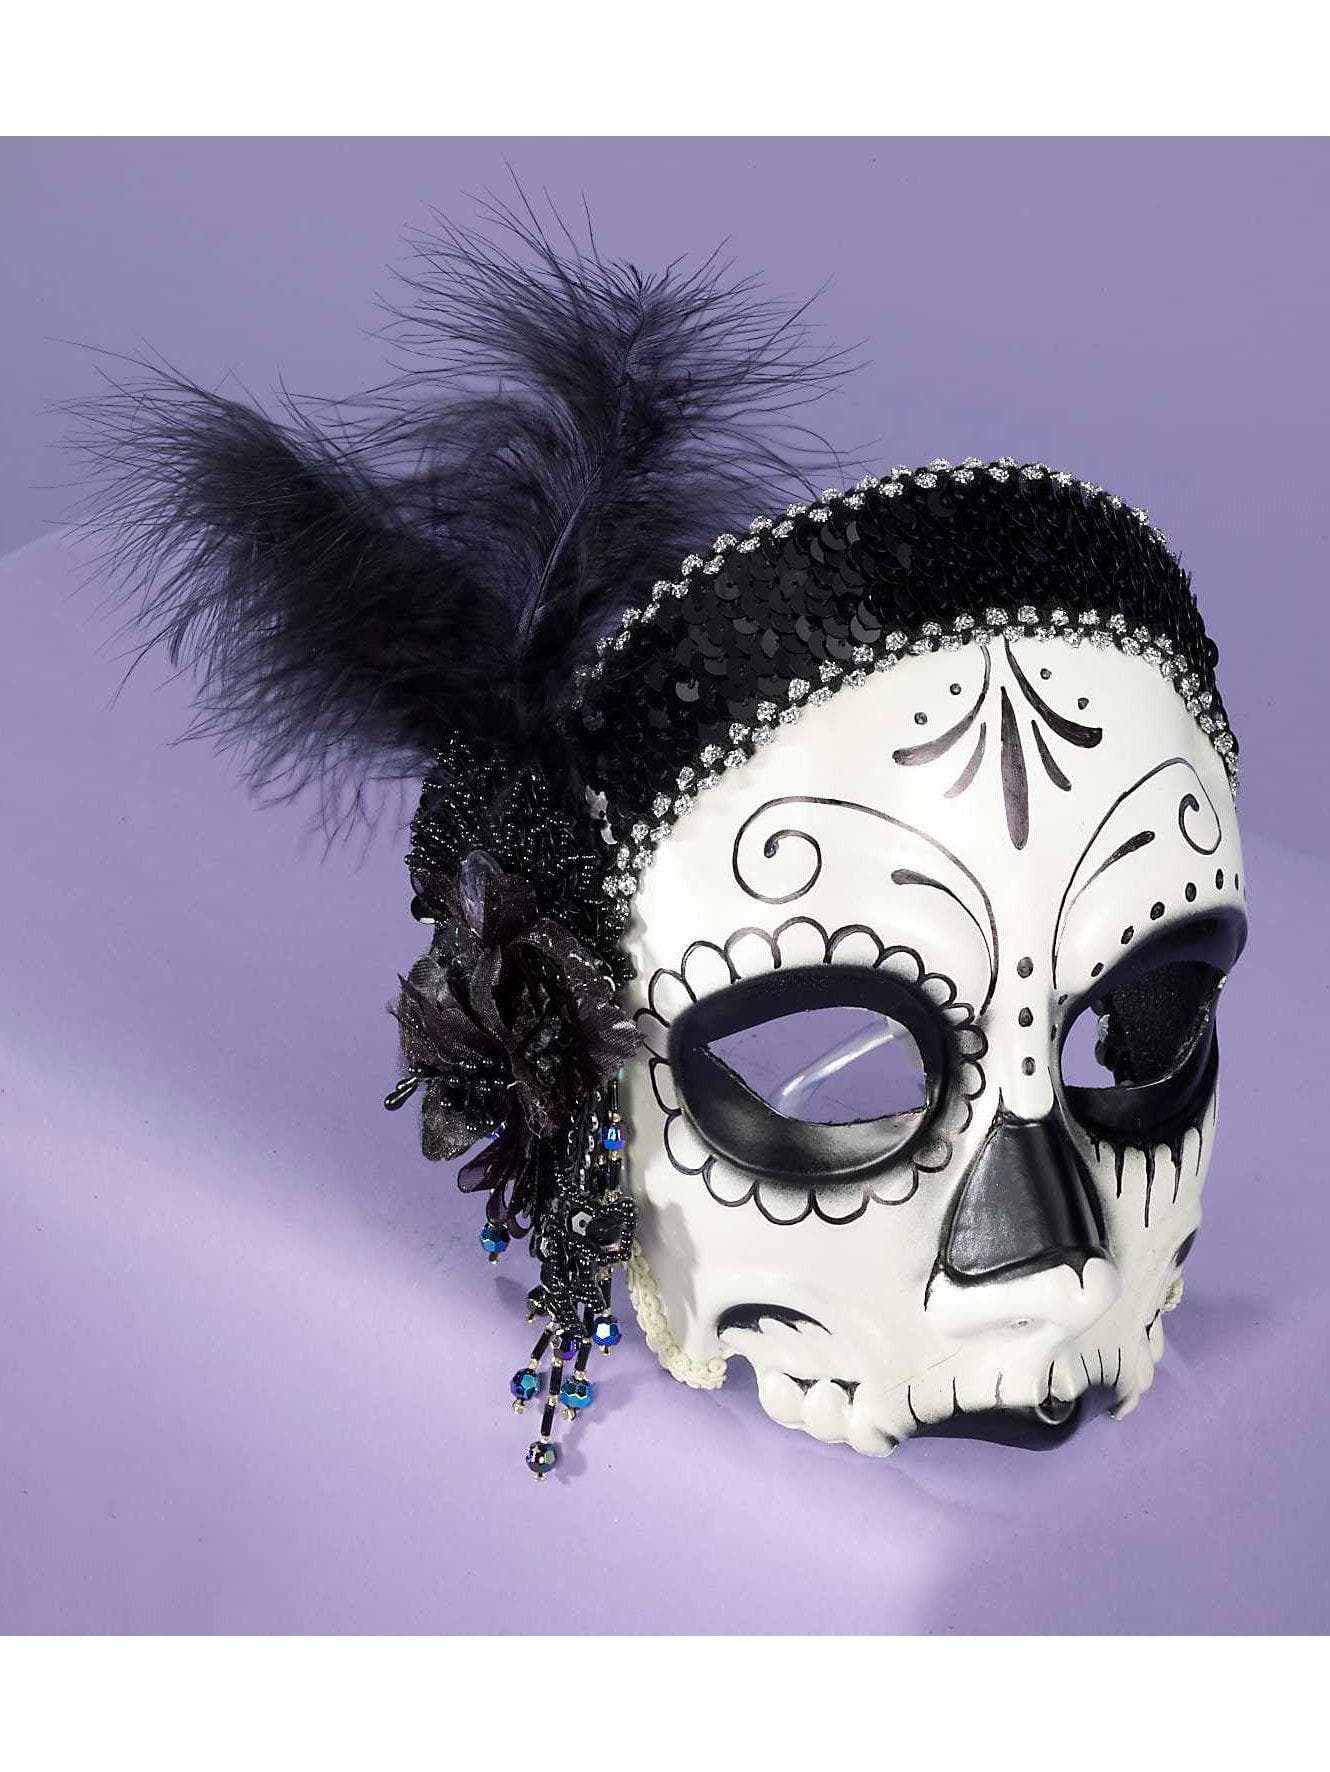 Adult Black and White Skull Masquerade Mask with Feathers - costumes.com